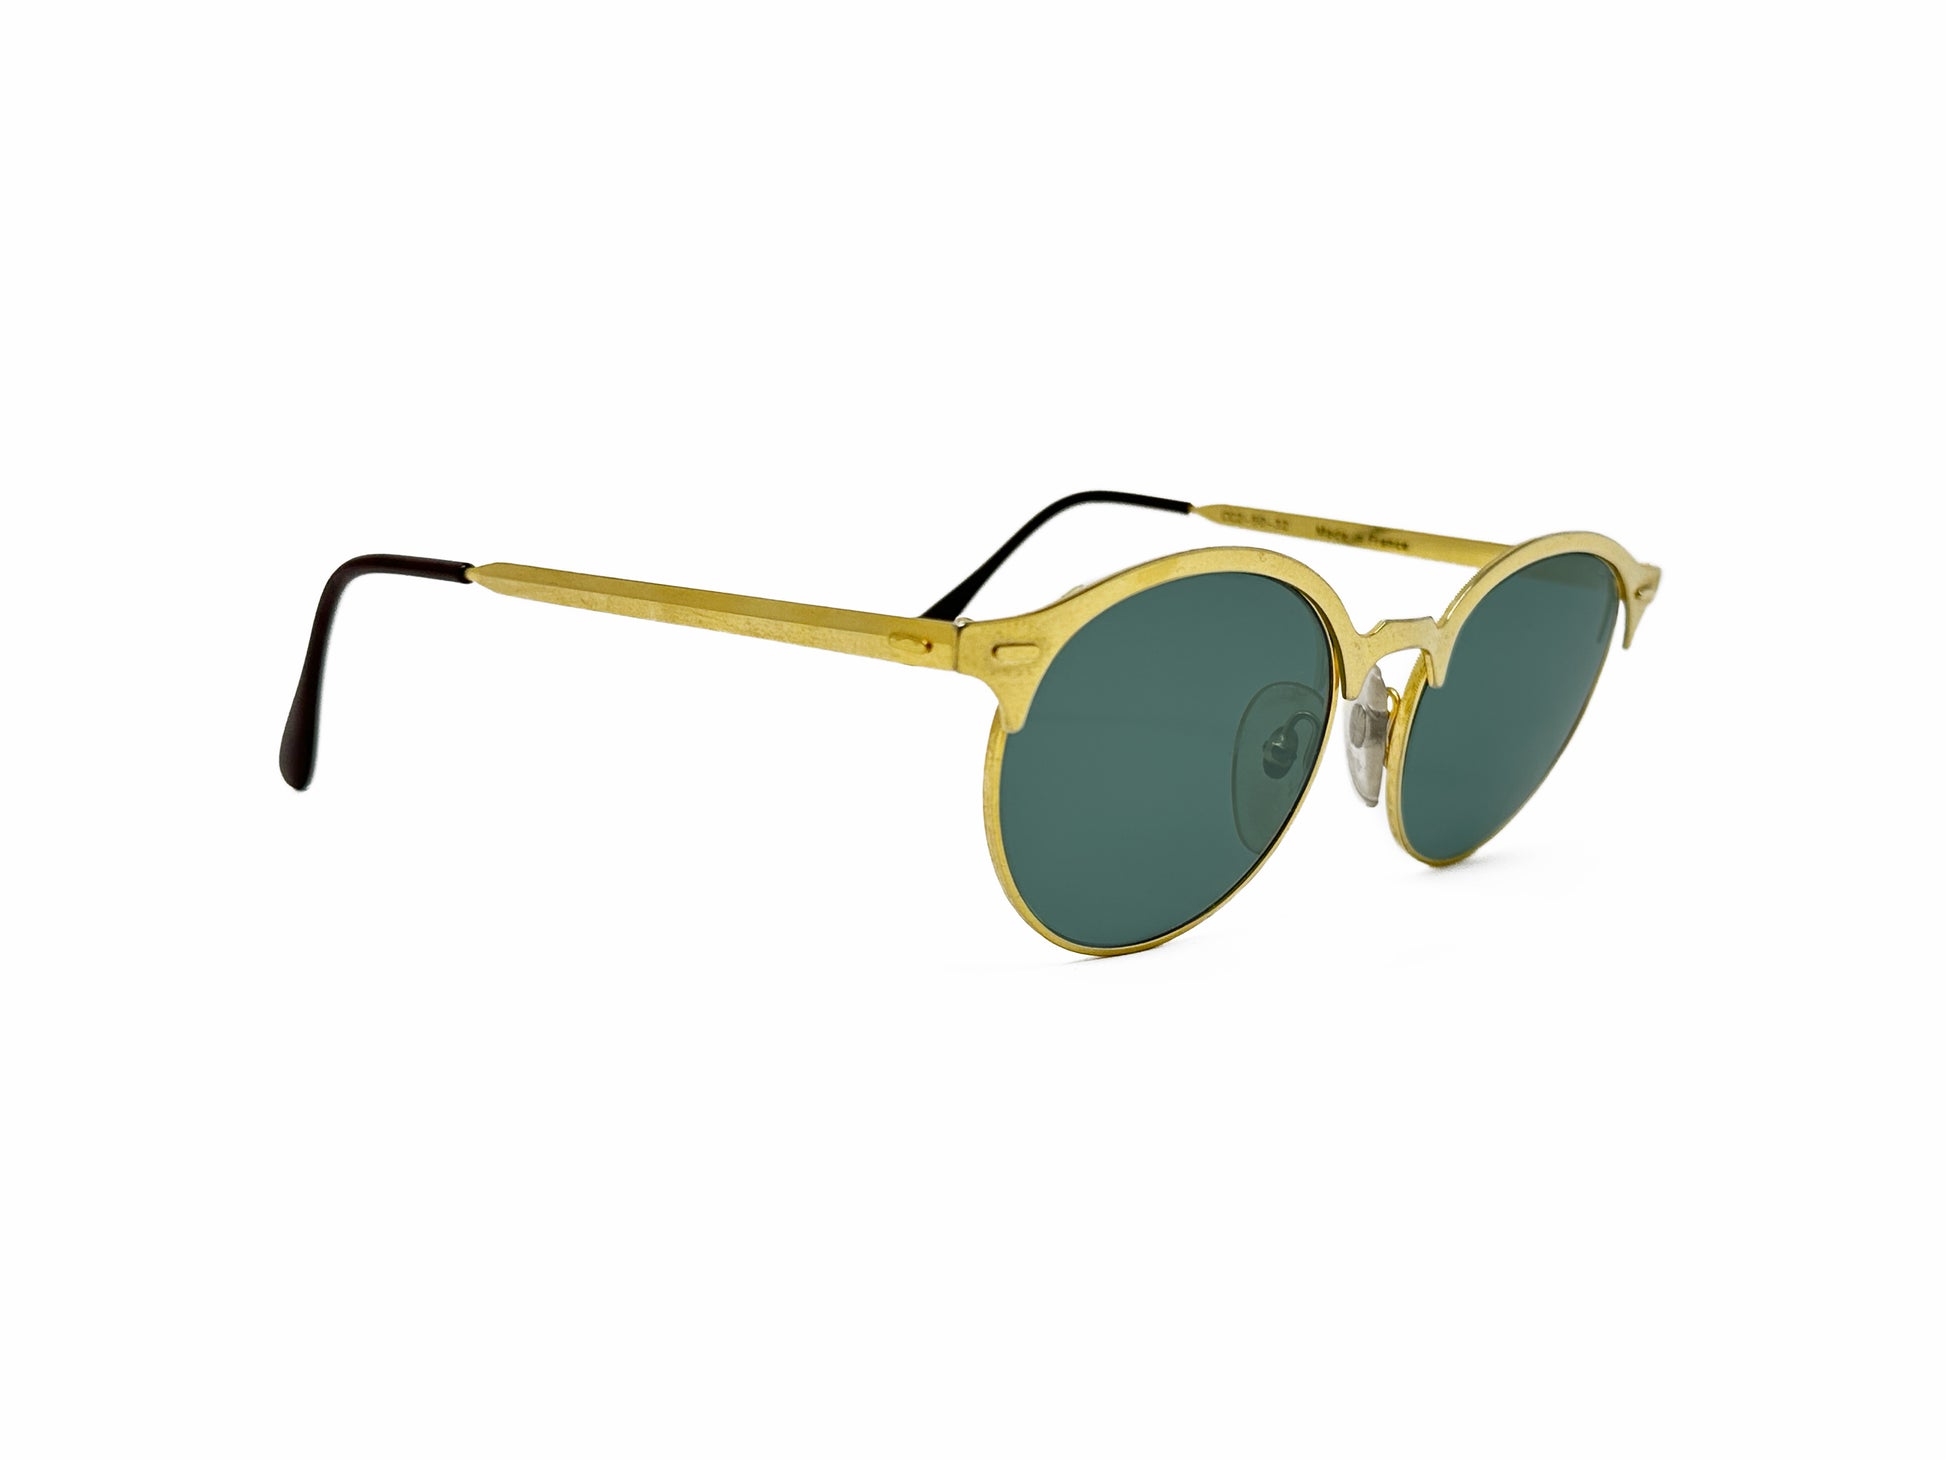 Ellen Tracy round sunglass with gold metal trim. Model: CC2. Color: Gold with green lens. Side view.